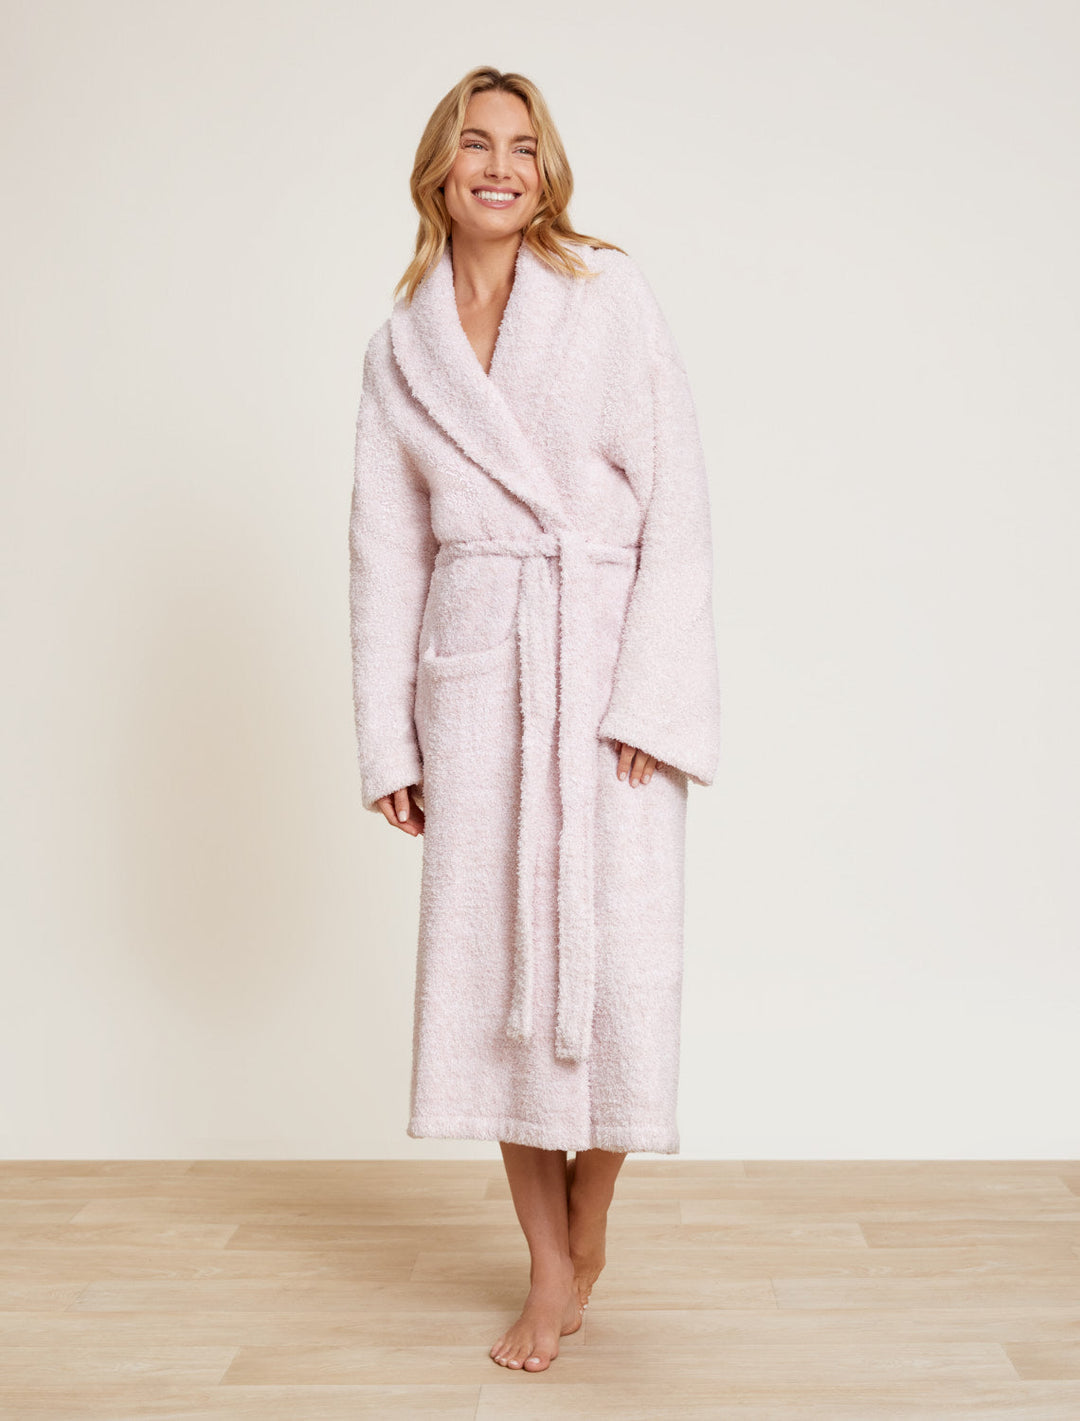 COZYCHIC HEATHERED ADULT ROBE-DUSTY ROSE/WHITE - Kingfisher Road - Online Boutique